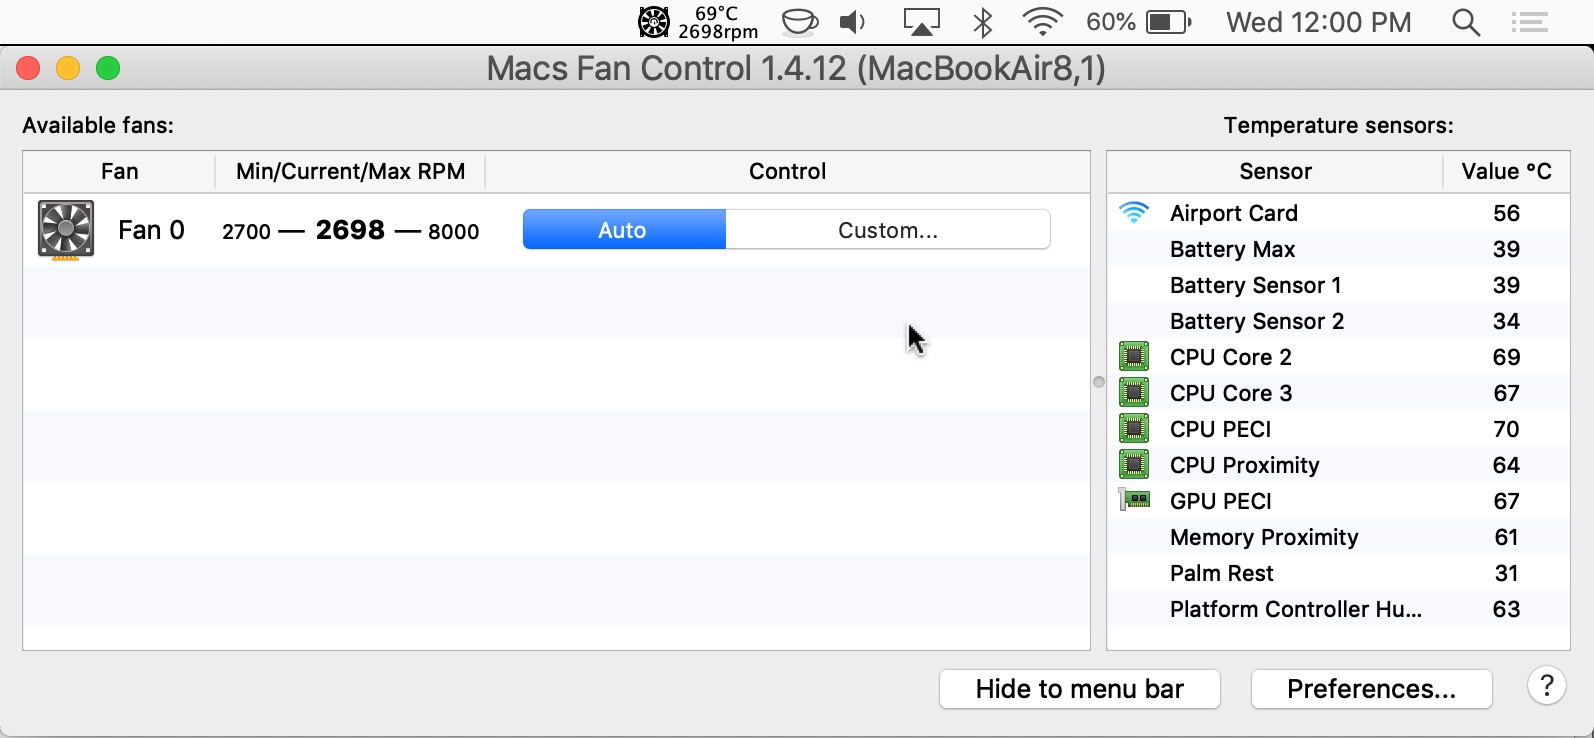 macs-fan-control-what-it-is-and-how-it-works